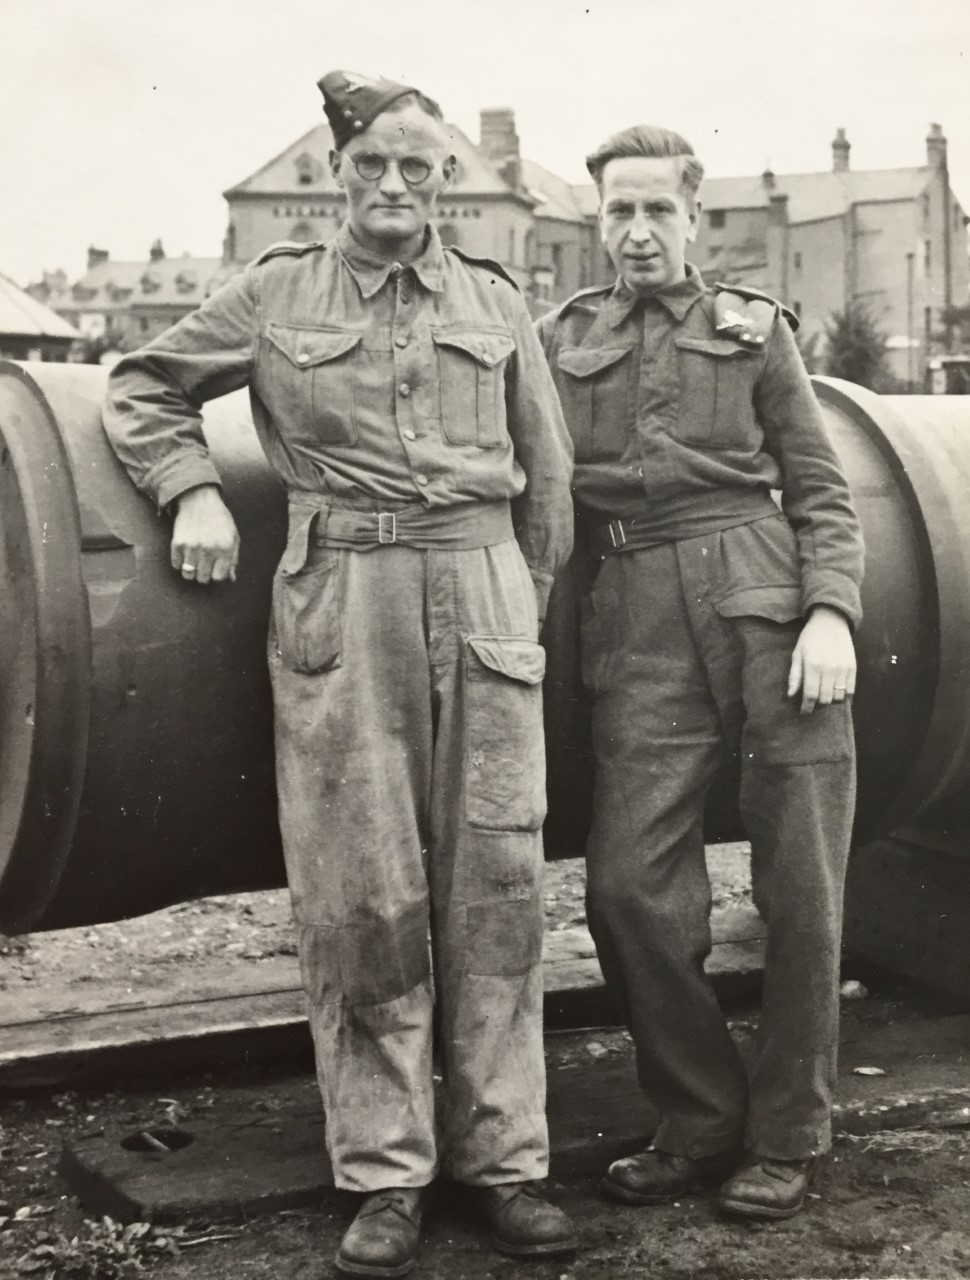 Black and white picture of Dawn Underhill's Father and Fellow RAF friend in Egypt in service.